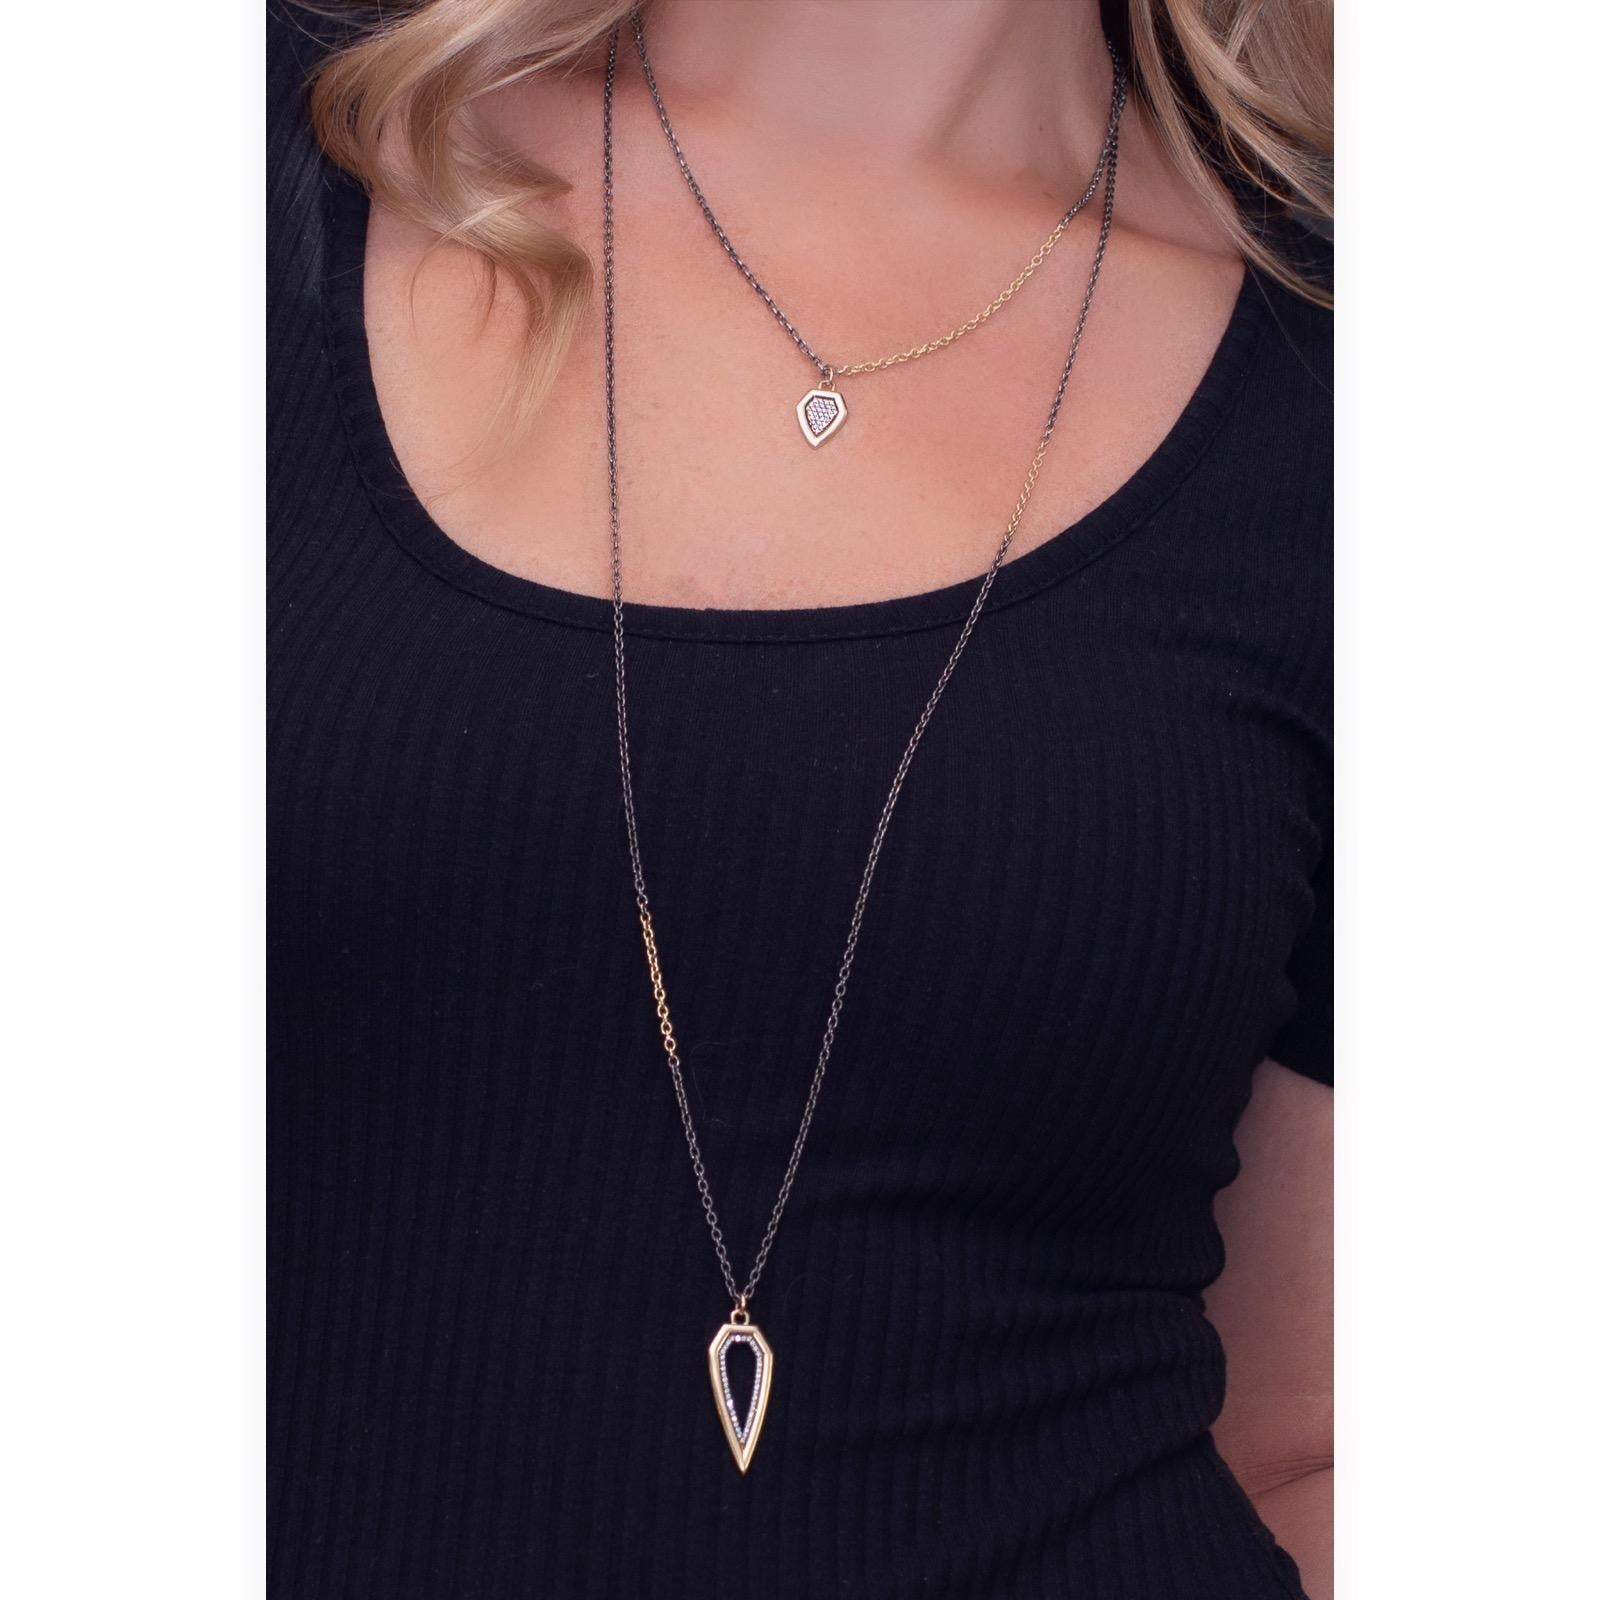 A modern pendant Inspired by the shapes of Victorian Shields, this elegant pendant has a row of diamonds lining the inner rim.  It hangs from a long blackened silver and 14 Karat gold chain.  
Materials: 14 Karat Gold, 1mm diamonds (.20ct), Oxidized